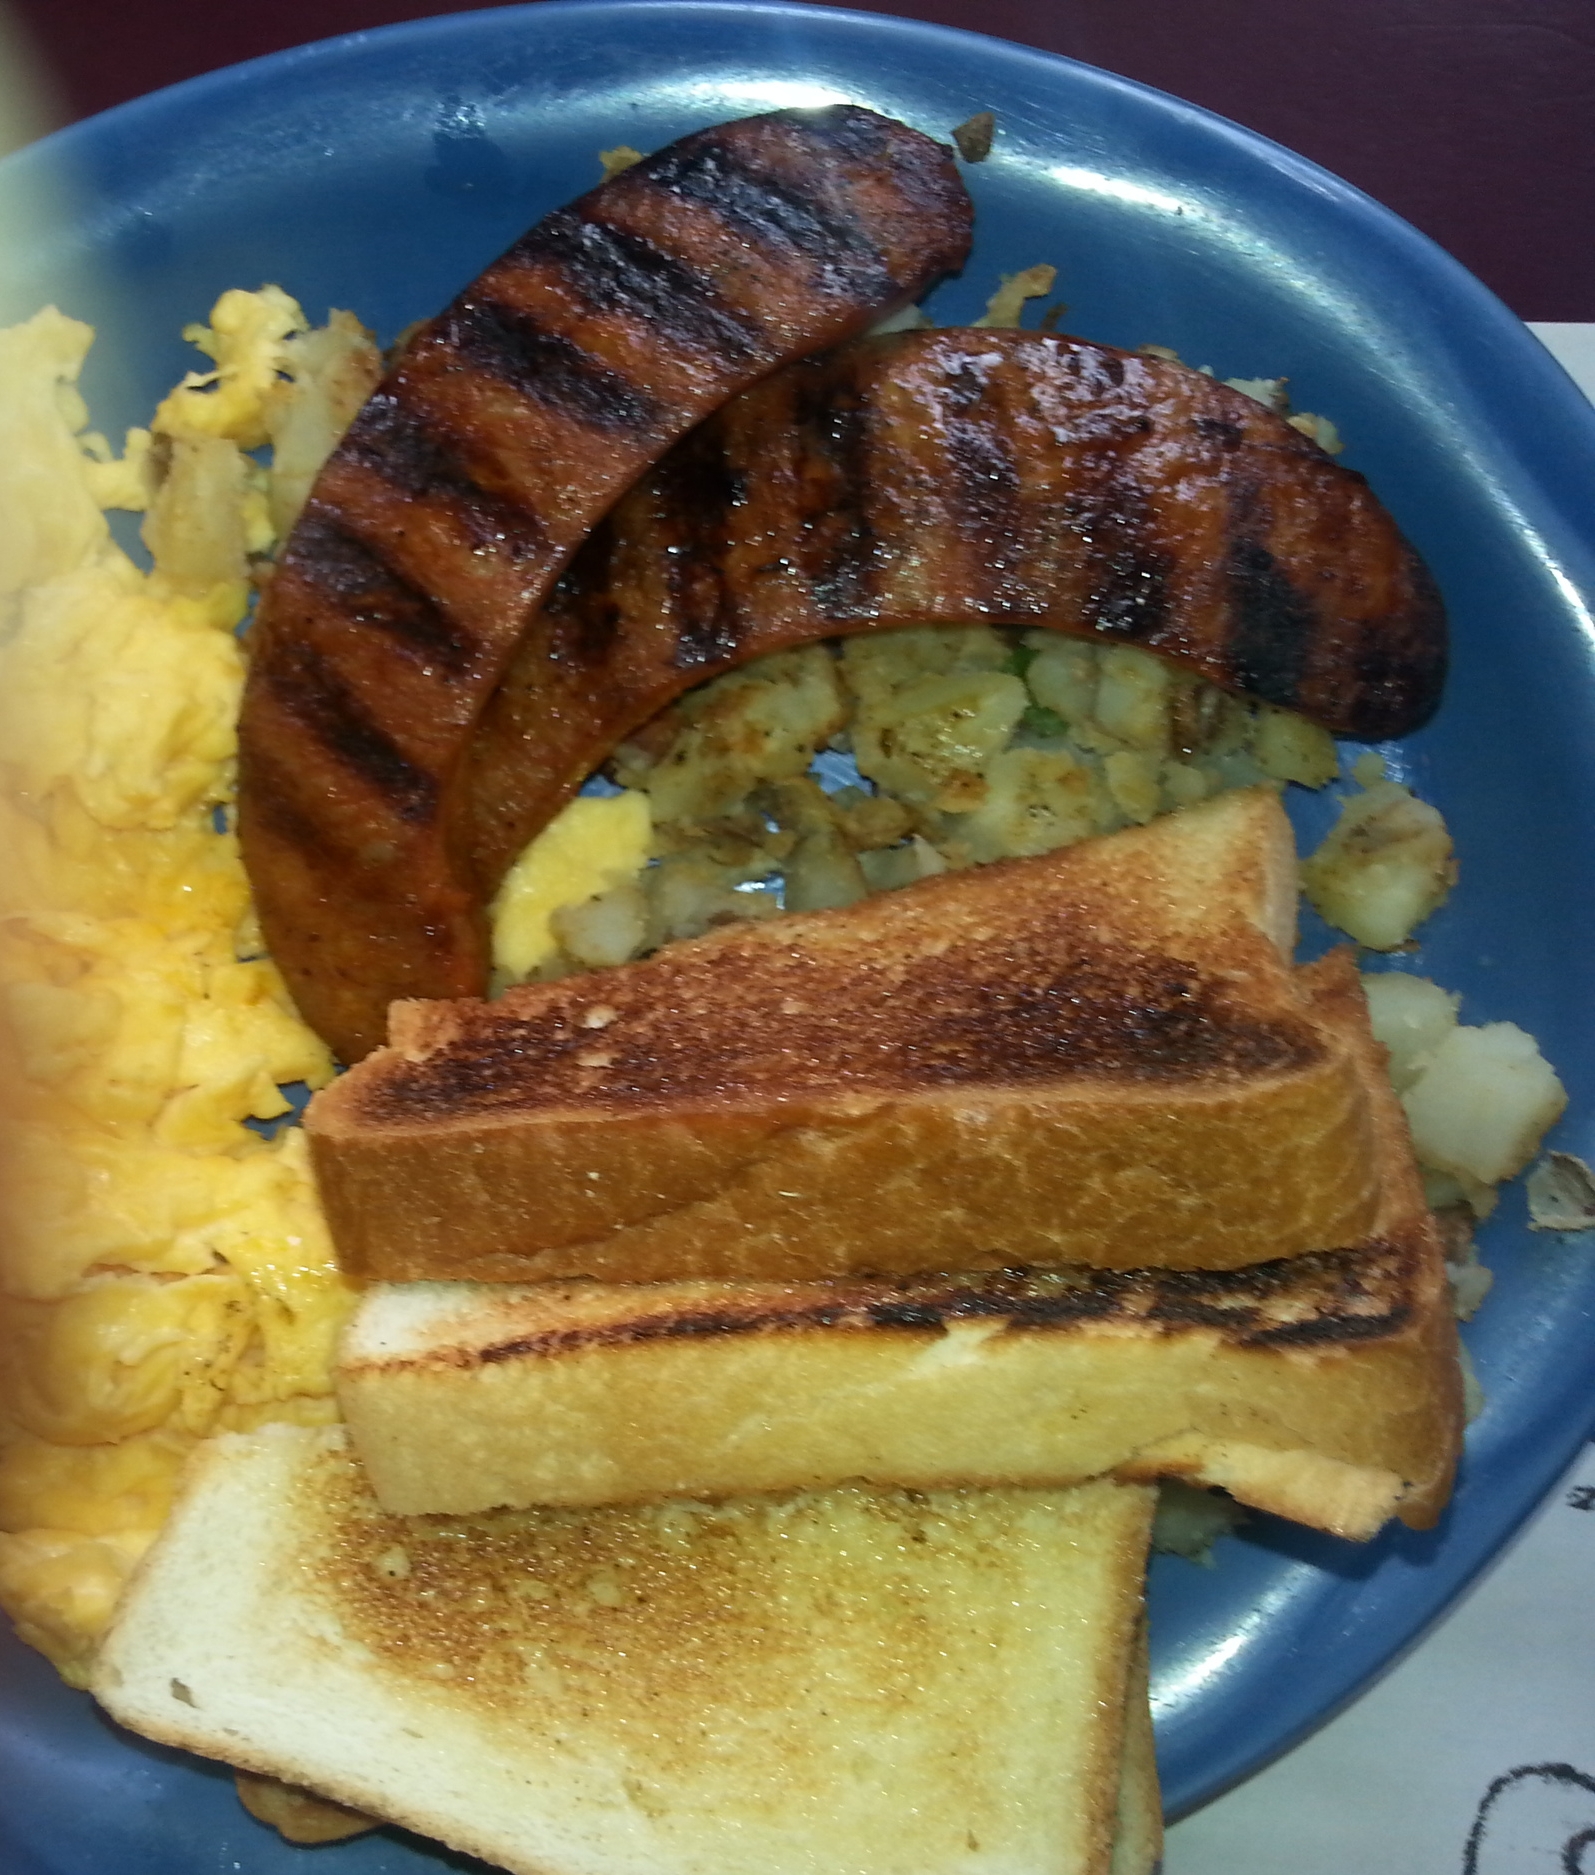 Home Fries at Cosmic Cafe